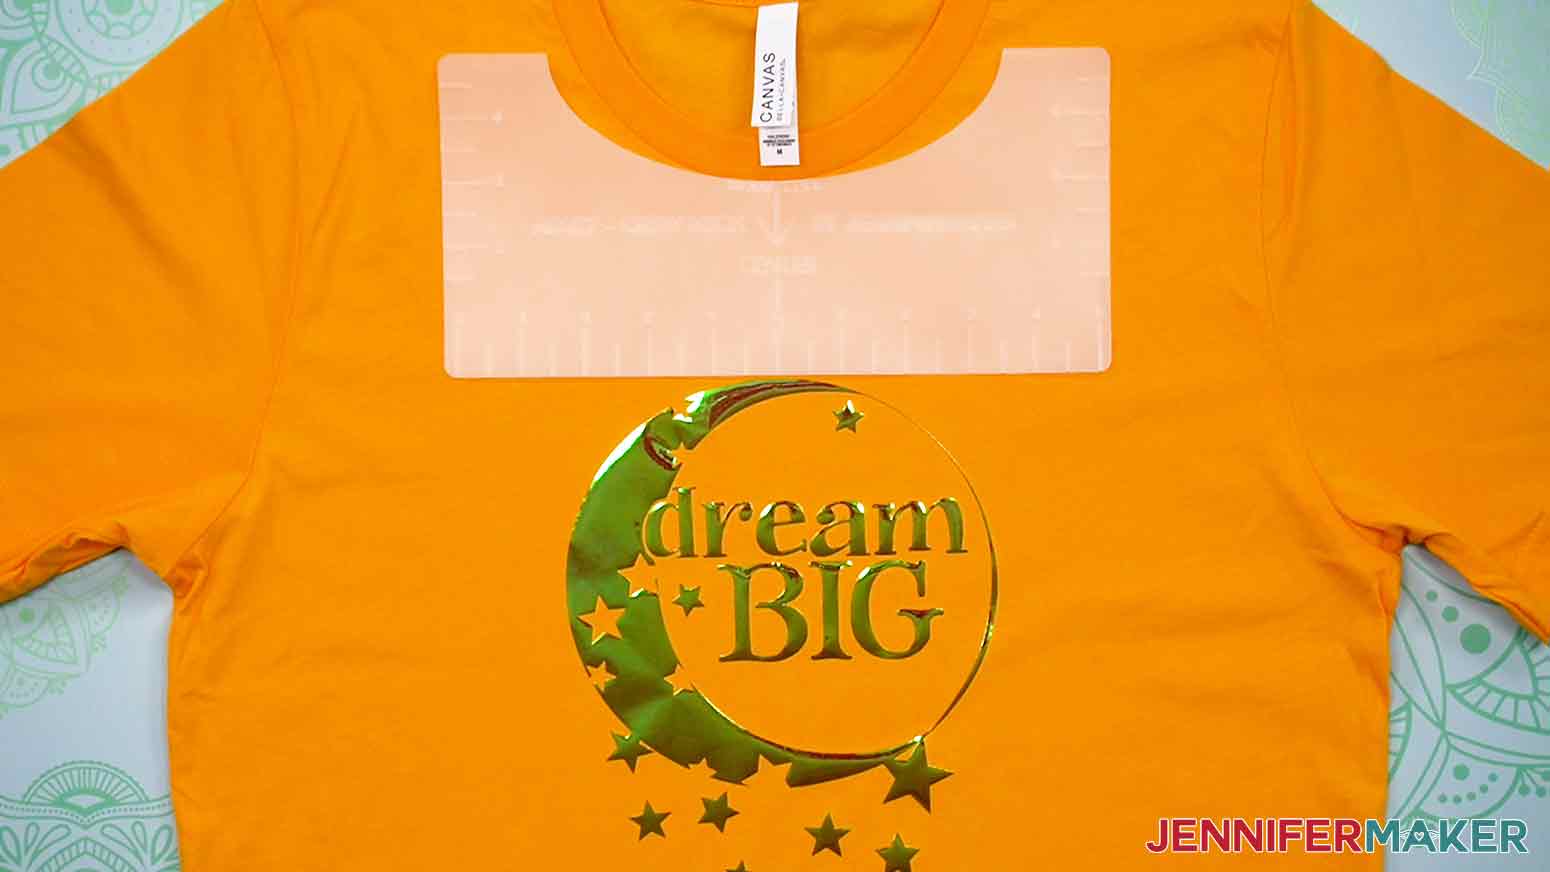 Another example of an orange, adult crew-neck T-shirt with the plastic Adult Crew-Neck T-Shirt Ruler aligned under the neckline of the shirt shows the proper placement and spacing of the Dream Big decal.